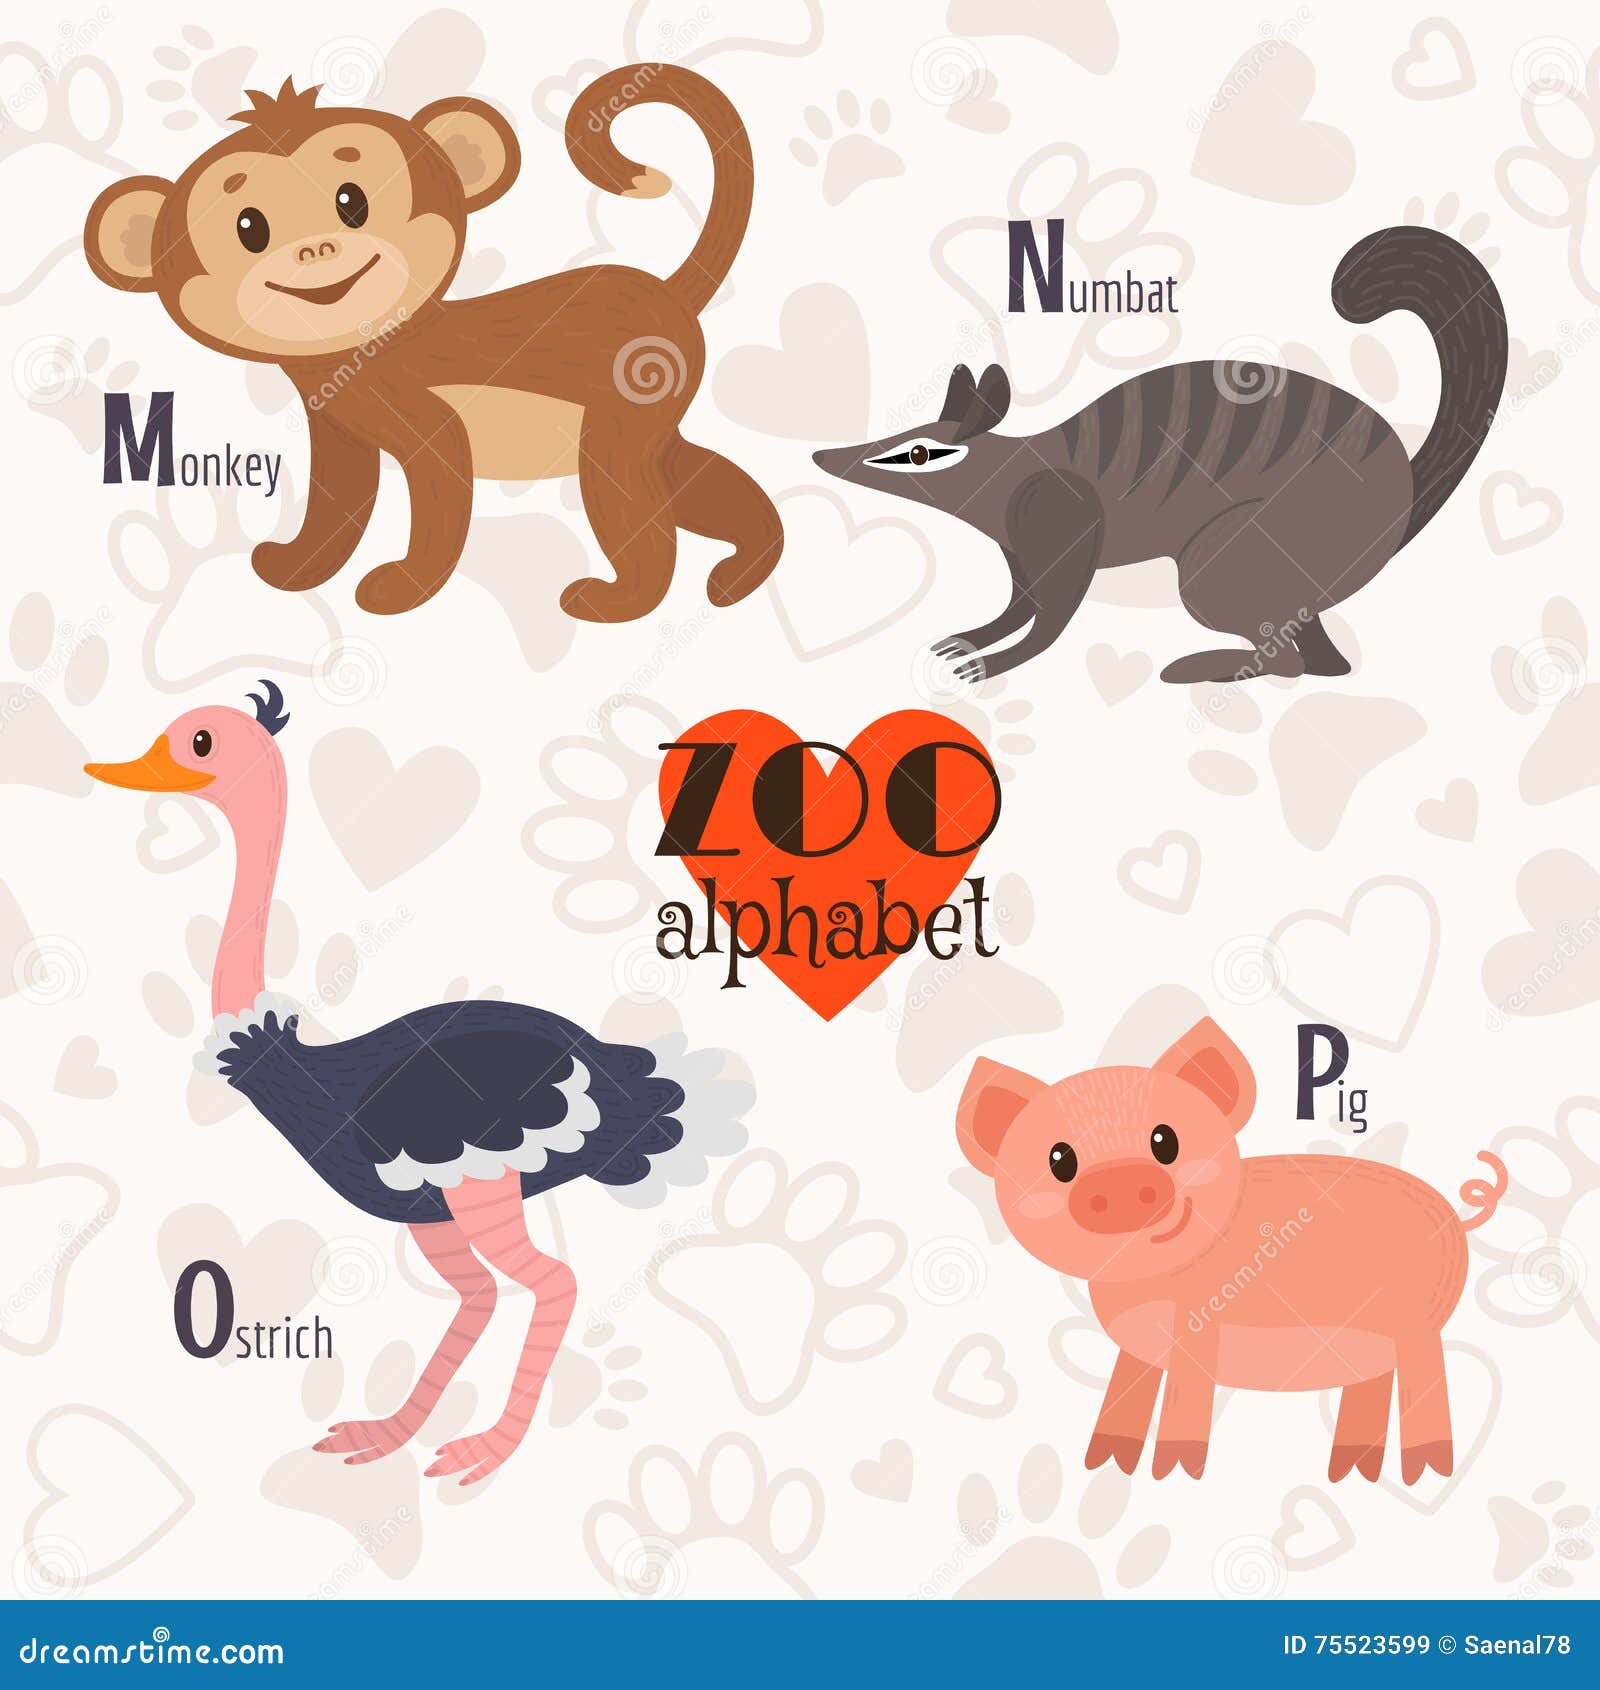 Zoo Alphabet with Funny Animals. M, N, O, P Letters. Monkey, Numbat,  Ostrich, Pig Stock Vector - Illustration of design, colorful: 75523599